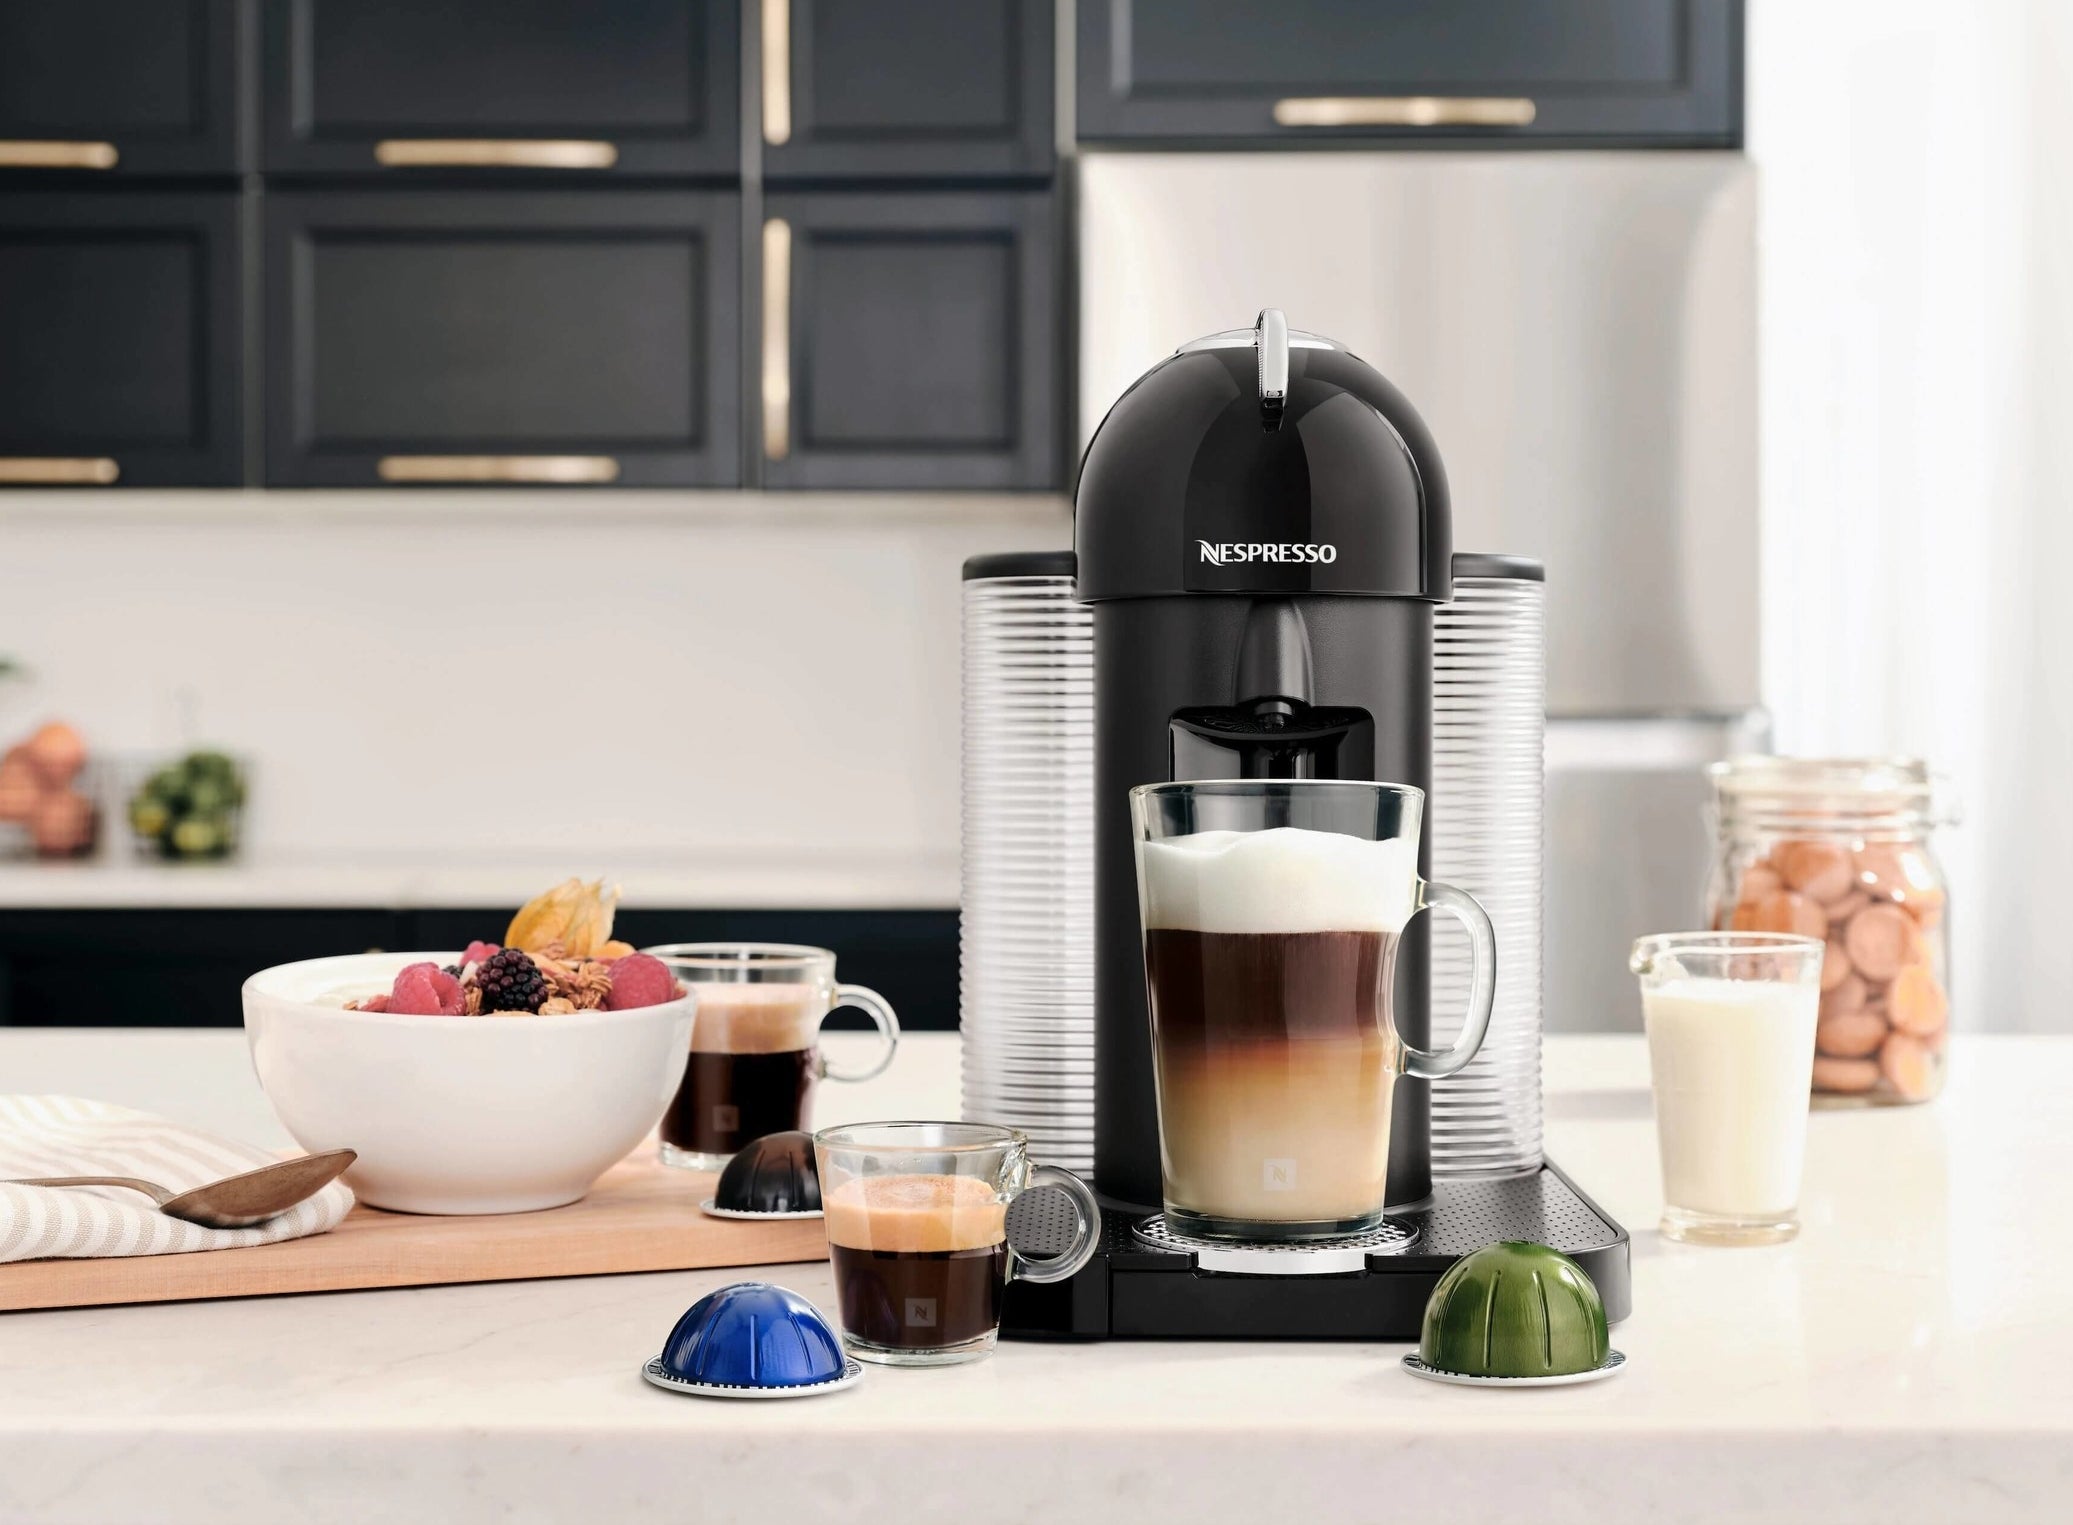 A Nespresso machine on a counter surrounded by cups of coffee